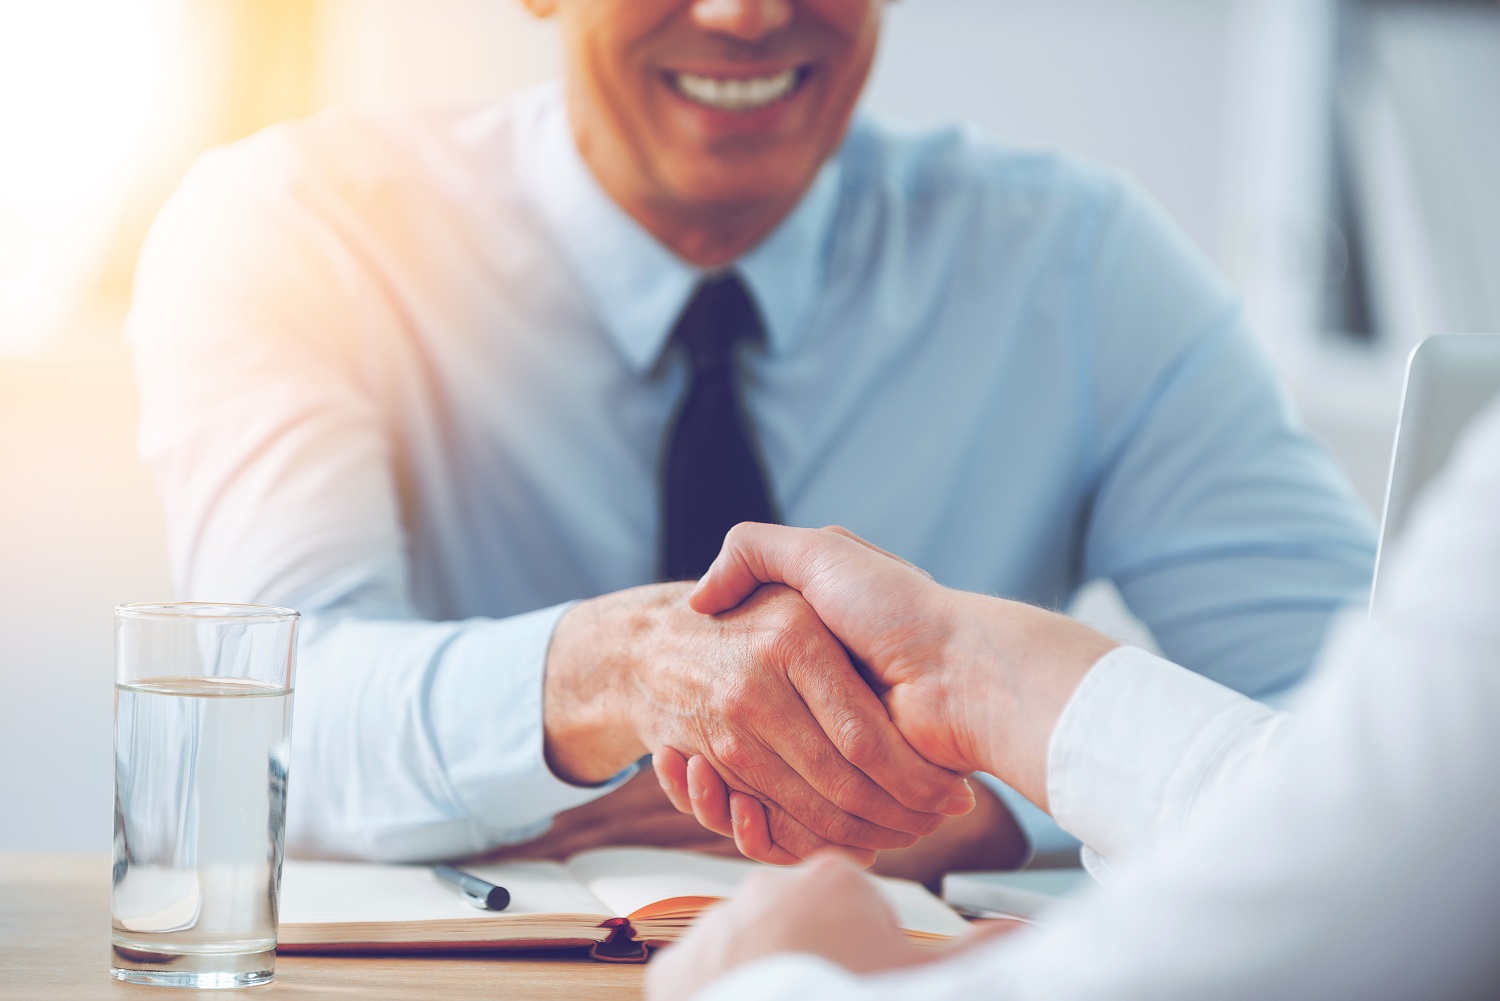 two people shaking hands at the beginning of a job interview